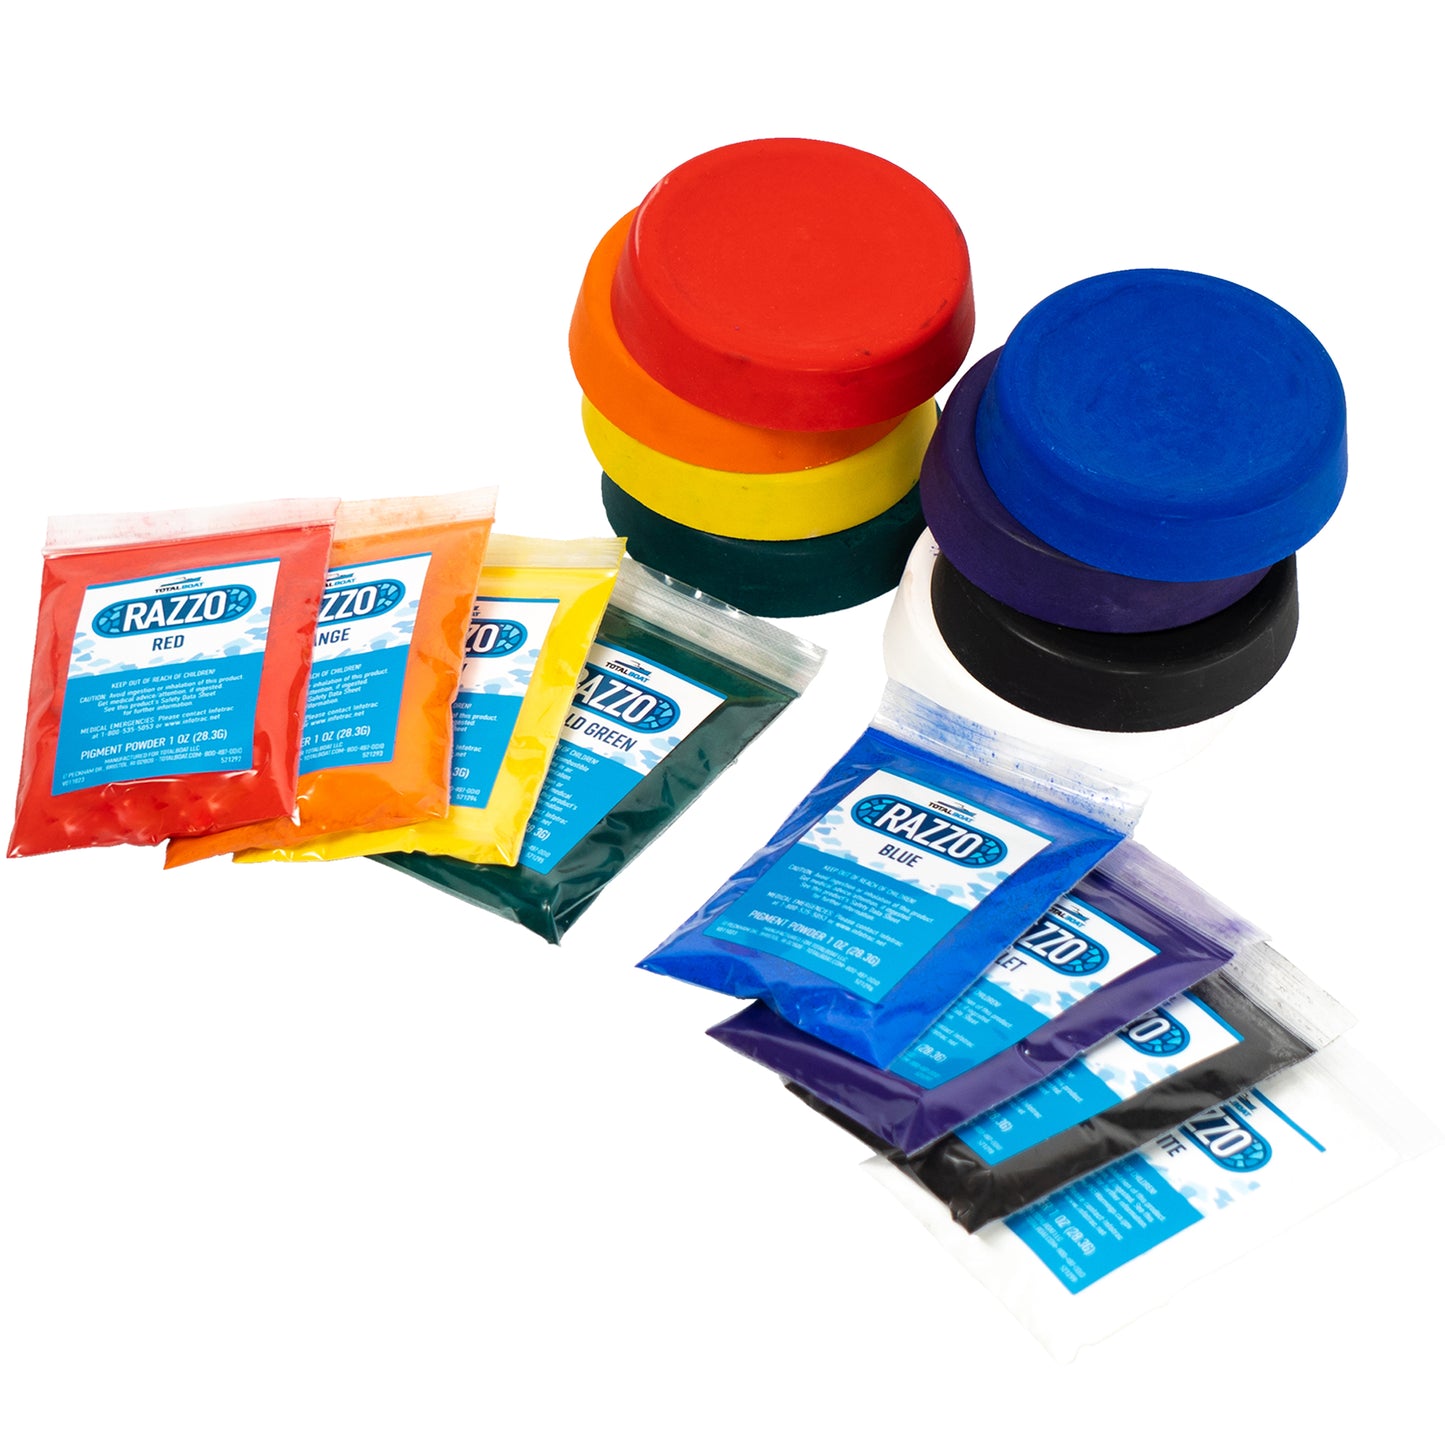 TotalBoat Razzo Pigment Kit eight colors and disc examples